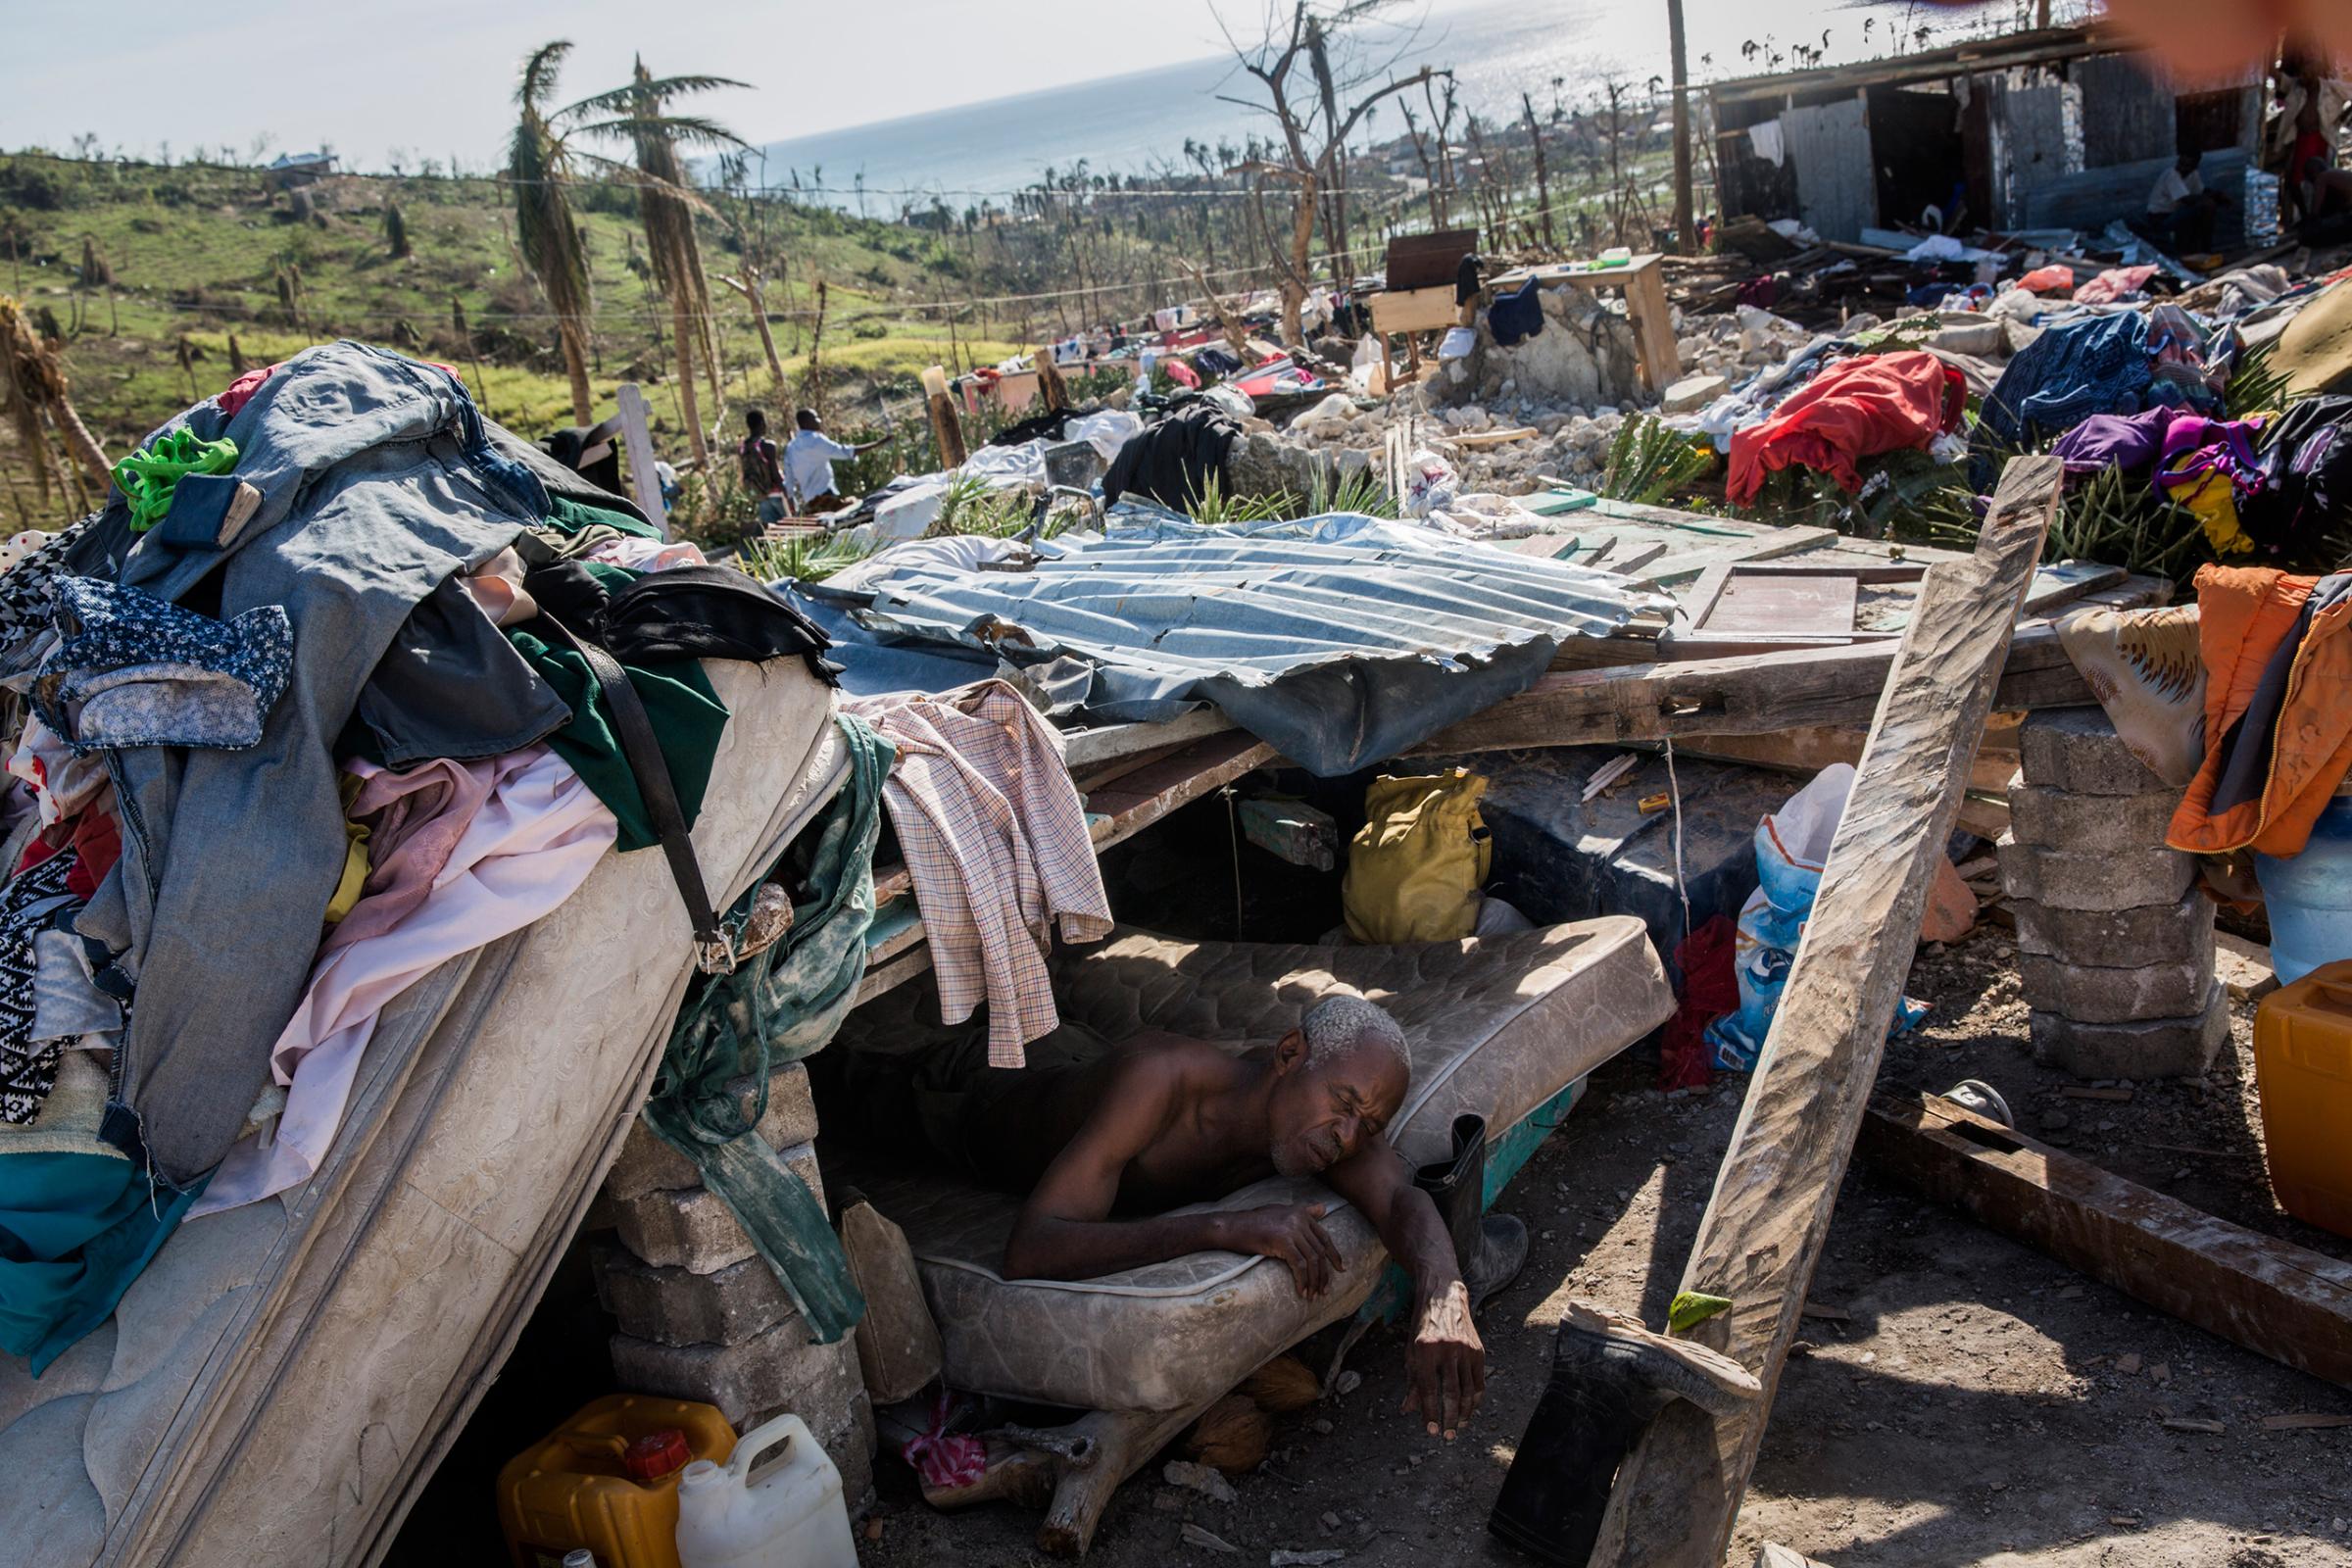 A man who is too ill to walk rests in a makeshift shelter on the site of his destroyed home in Roche-a-Bateau, southwestern Haiti, on Oct. 8, 2016.